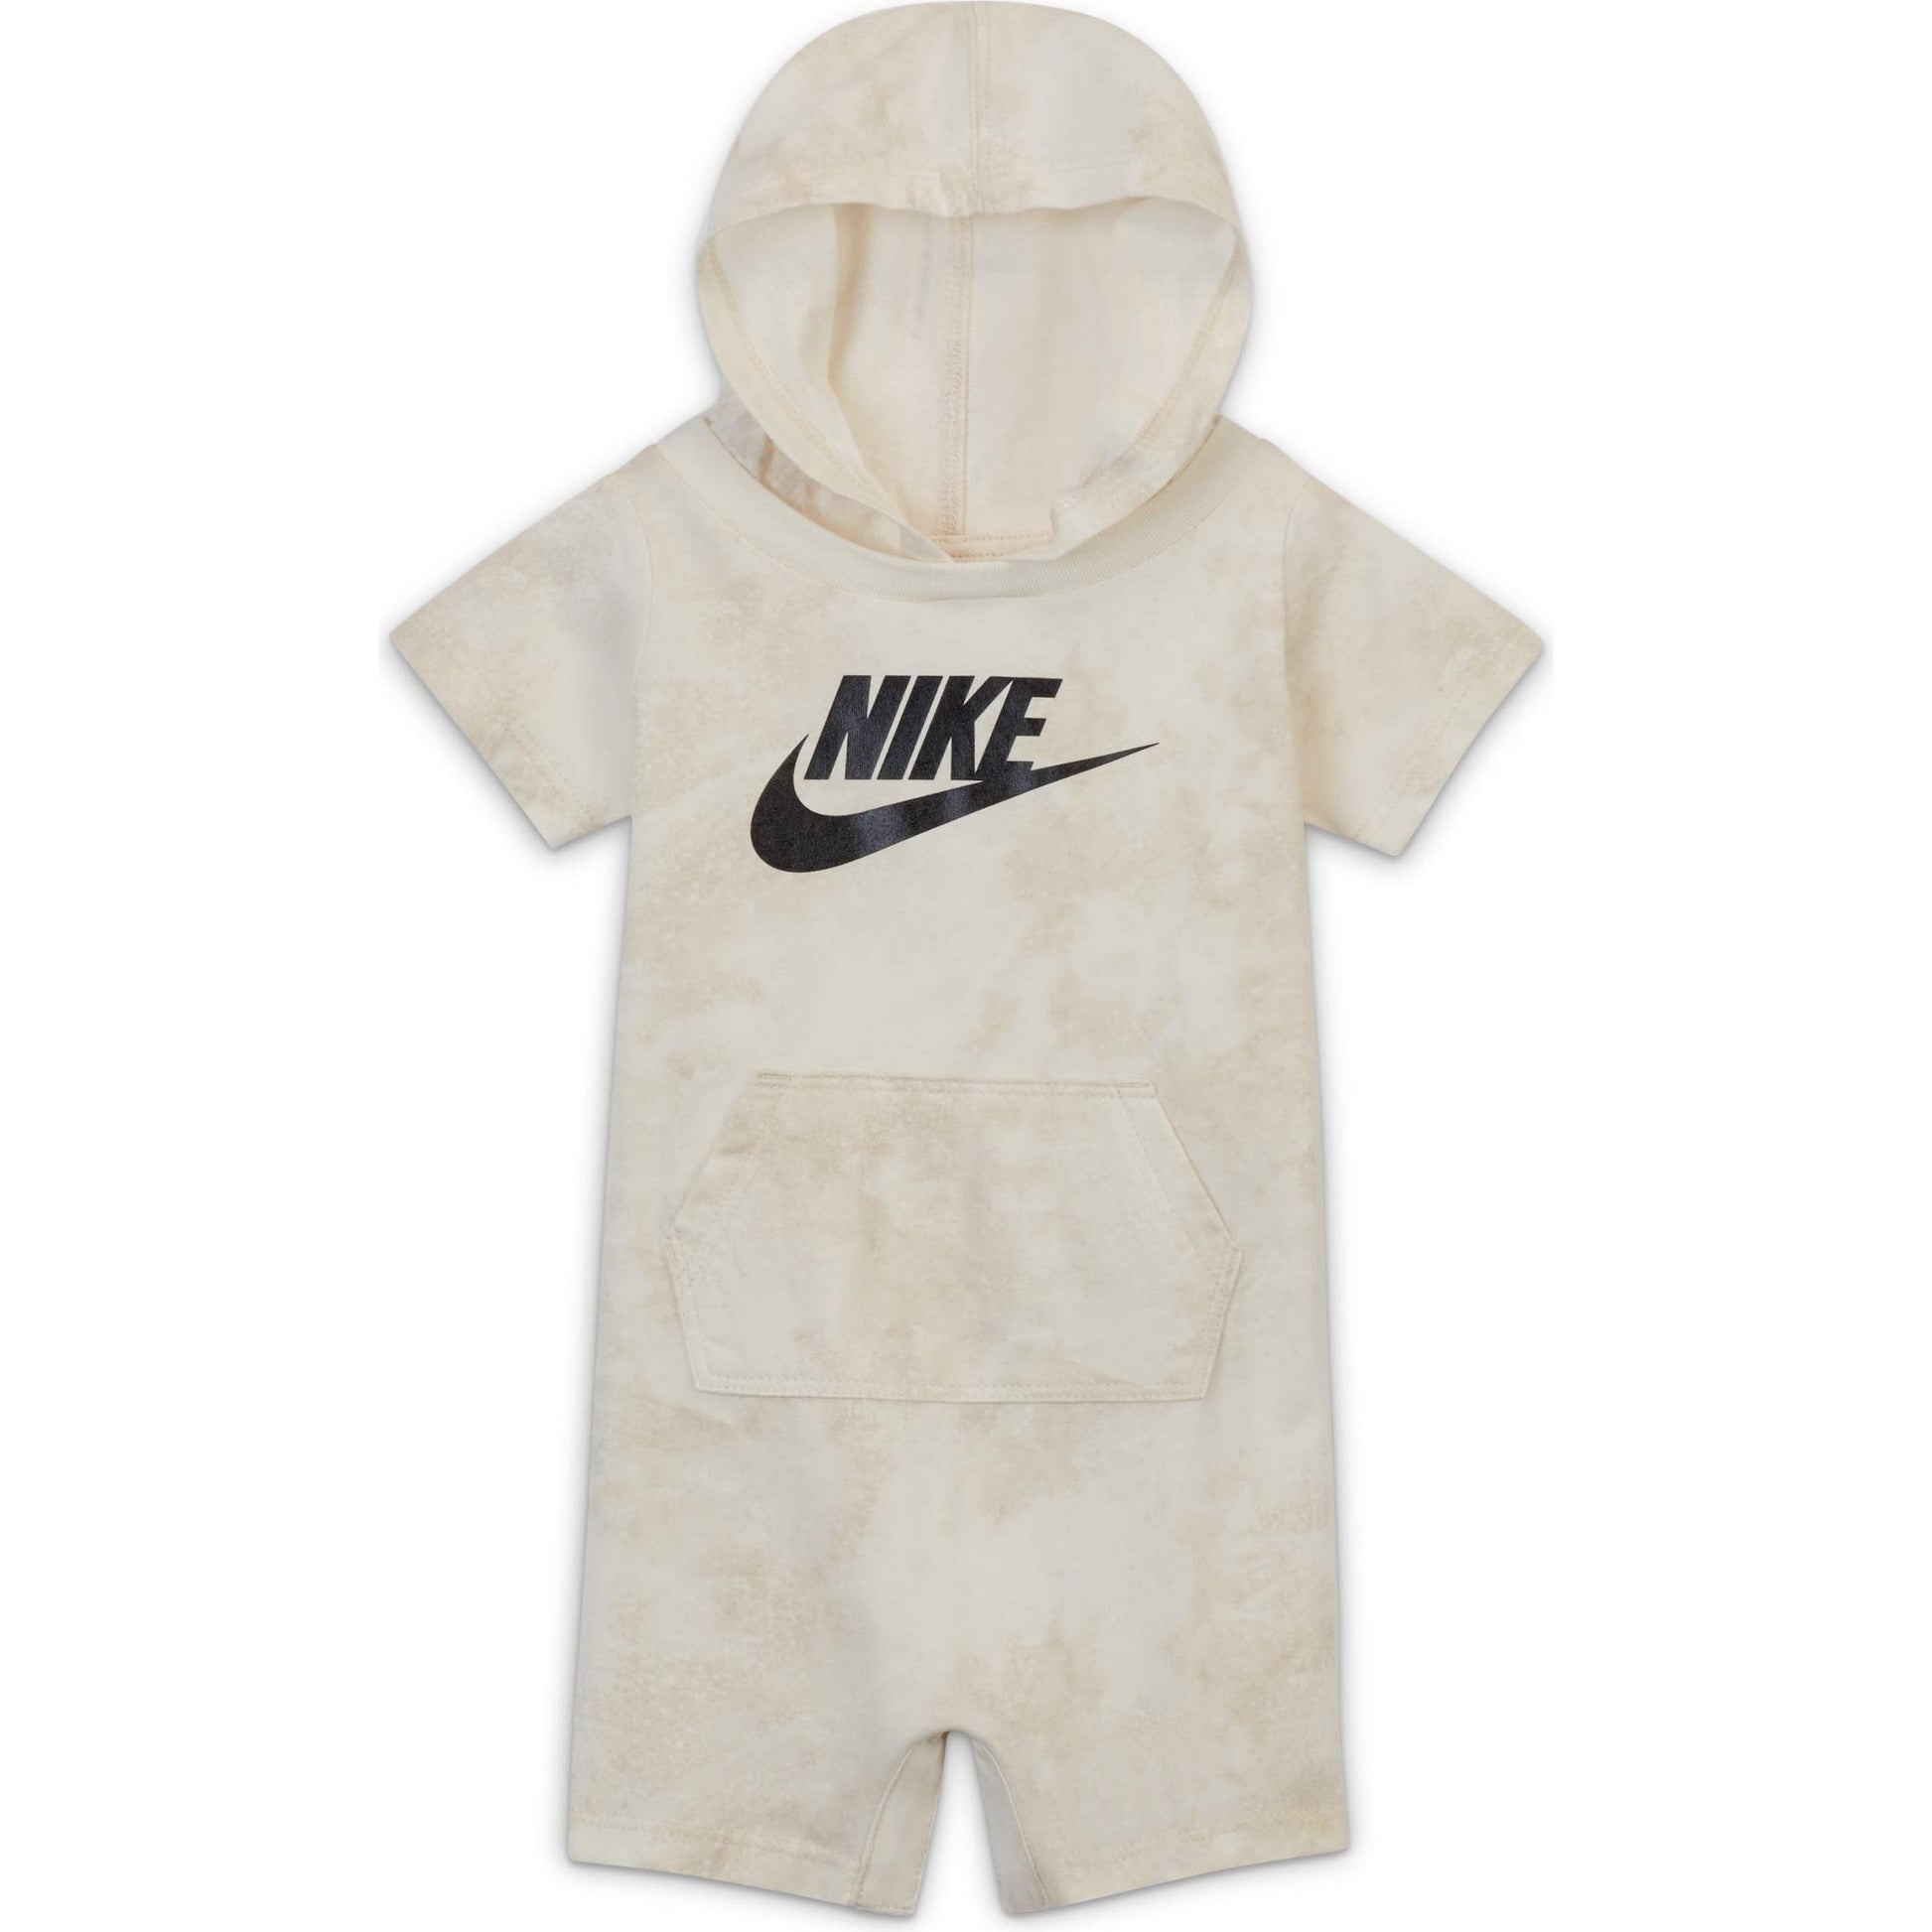 Image 1 of NSW Hooded Romper (Infant)